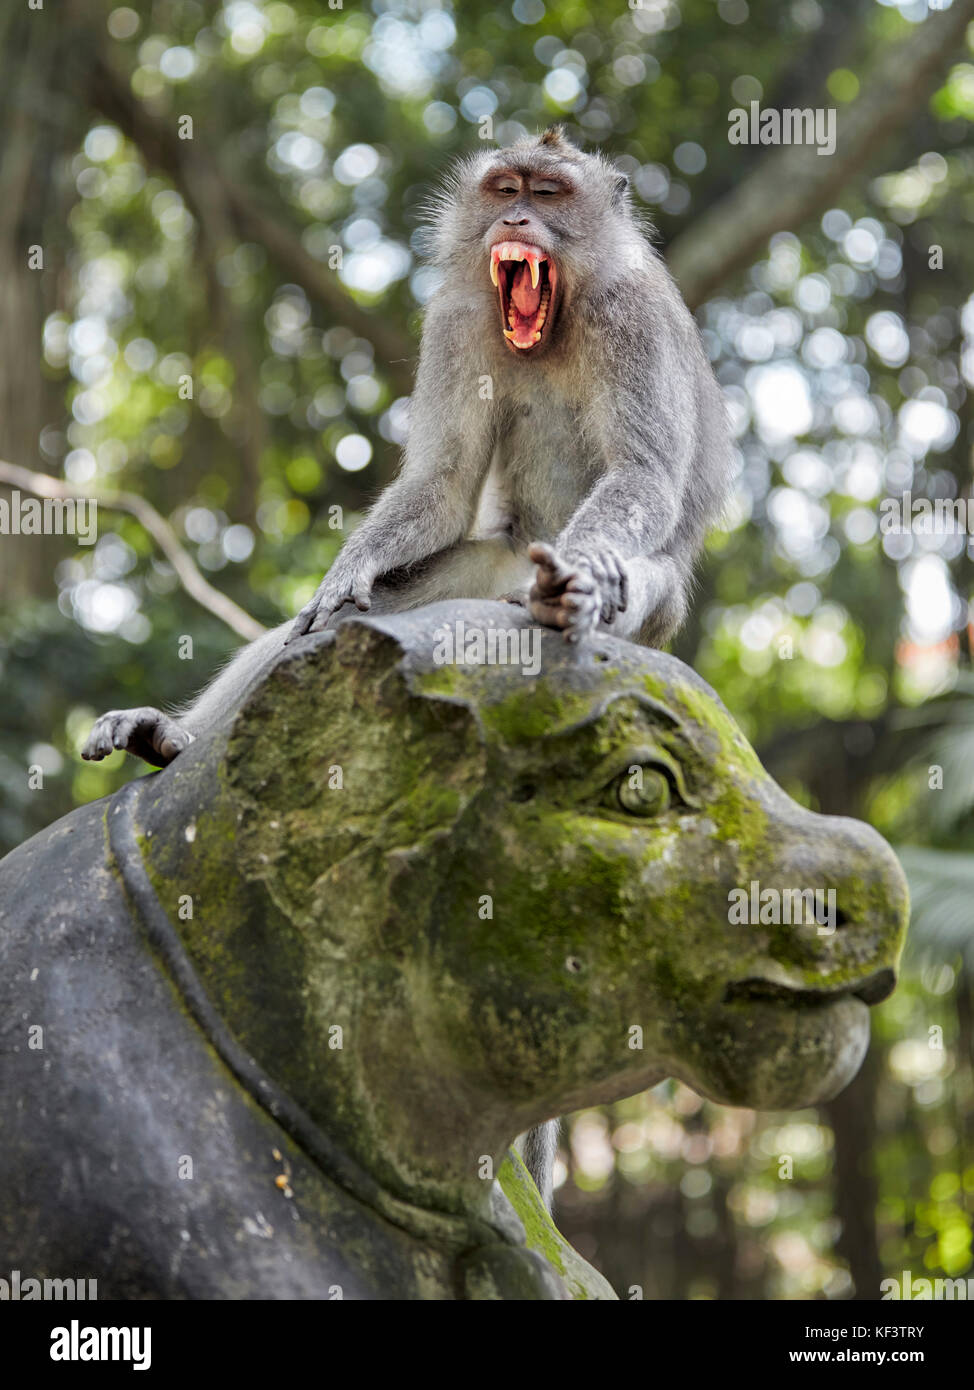 Long-tailed macaque (Macaca fascicularis) sitting on a statue. Sacred Monkey Forest Sanctuary, Ubud, Bali, Indonesia. Stock Photo